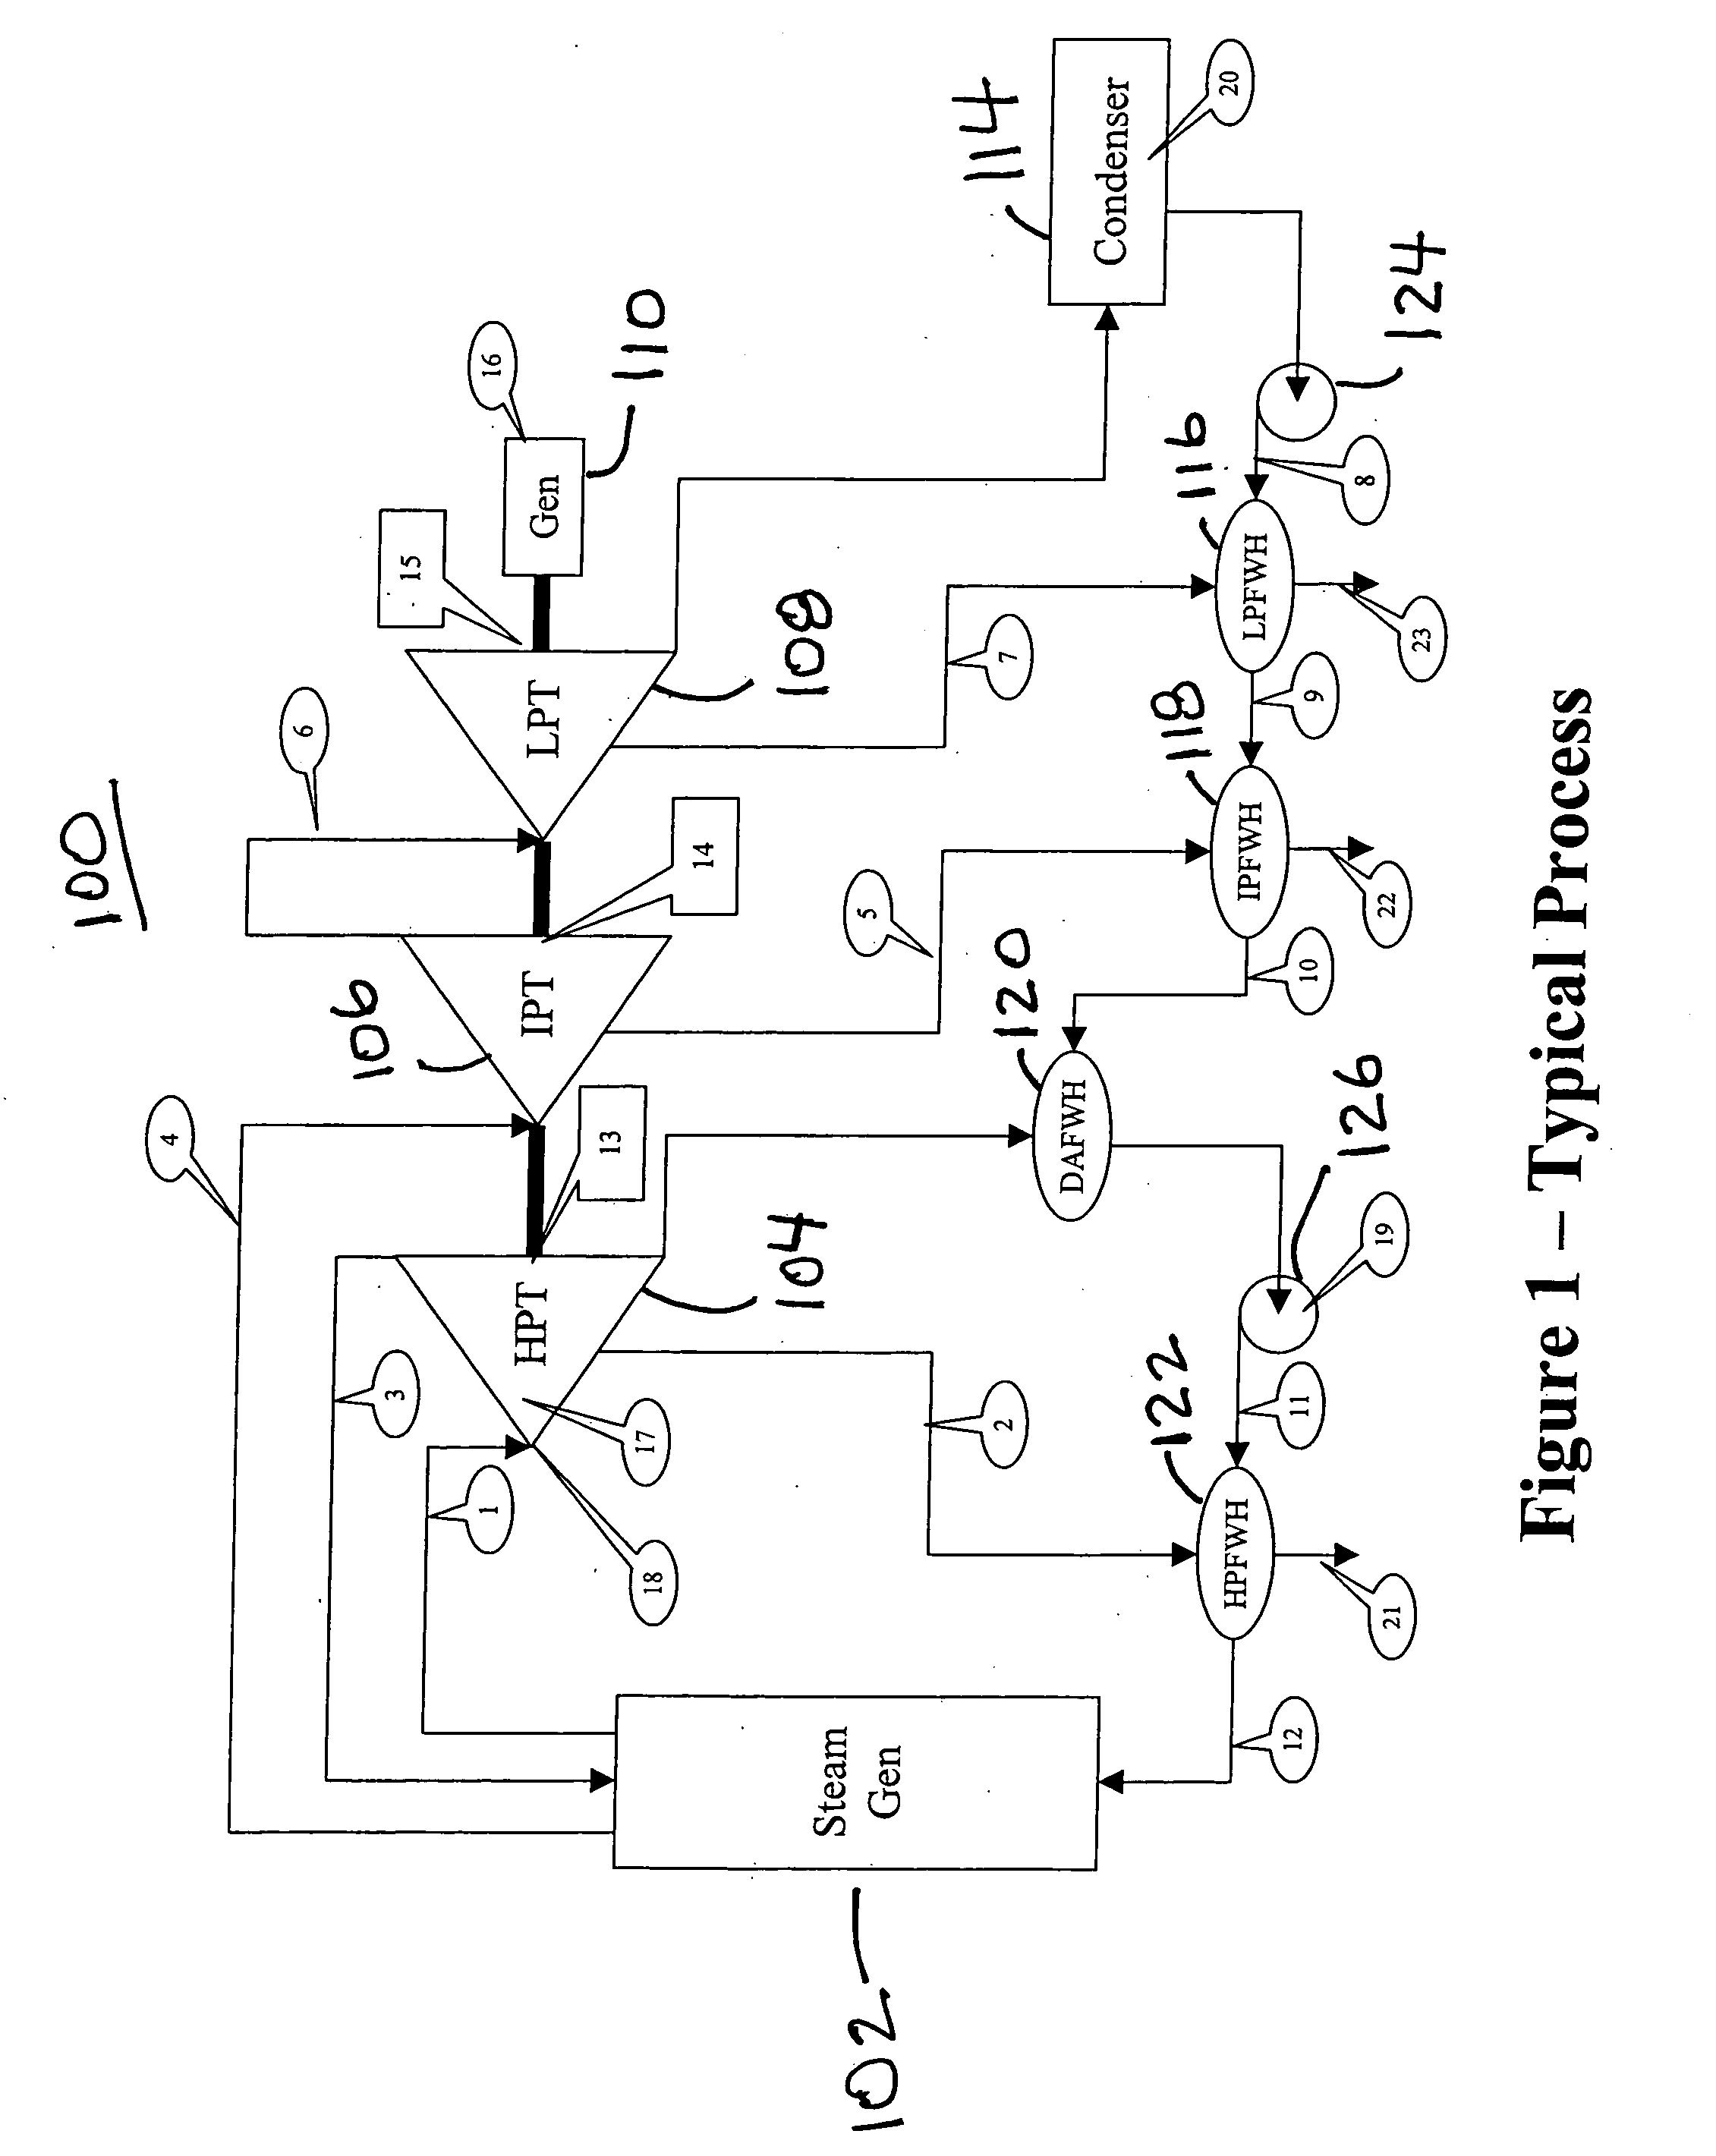 Method and apparatus to diagnose mechanical problems in machinery